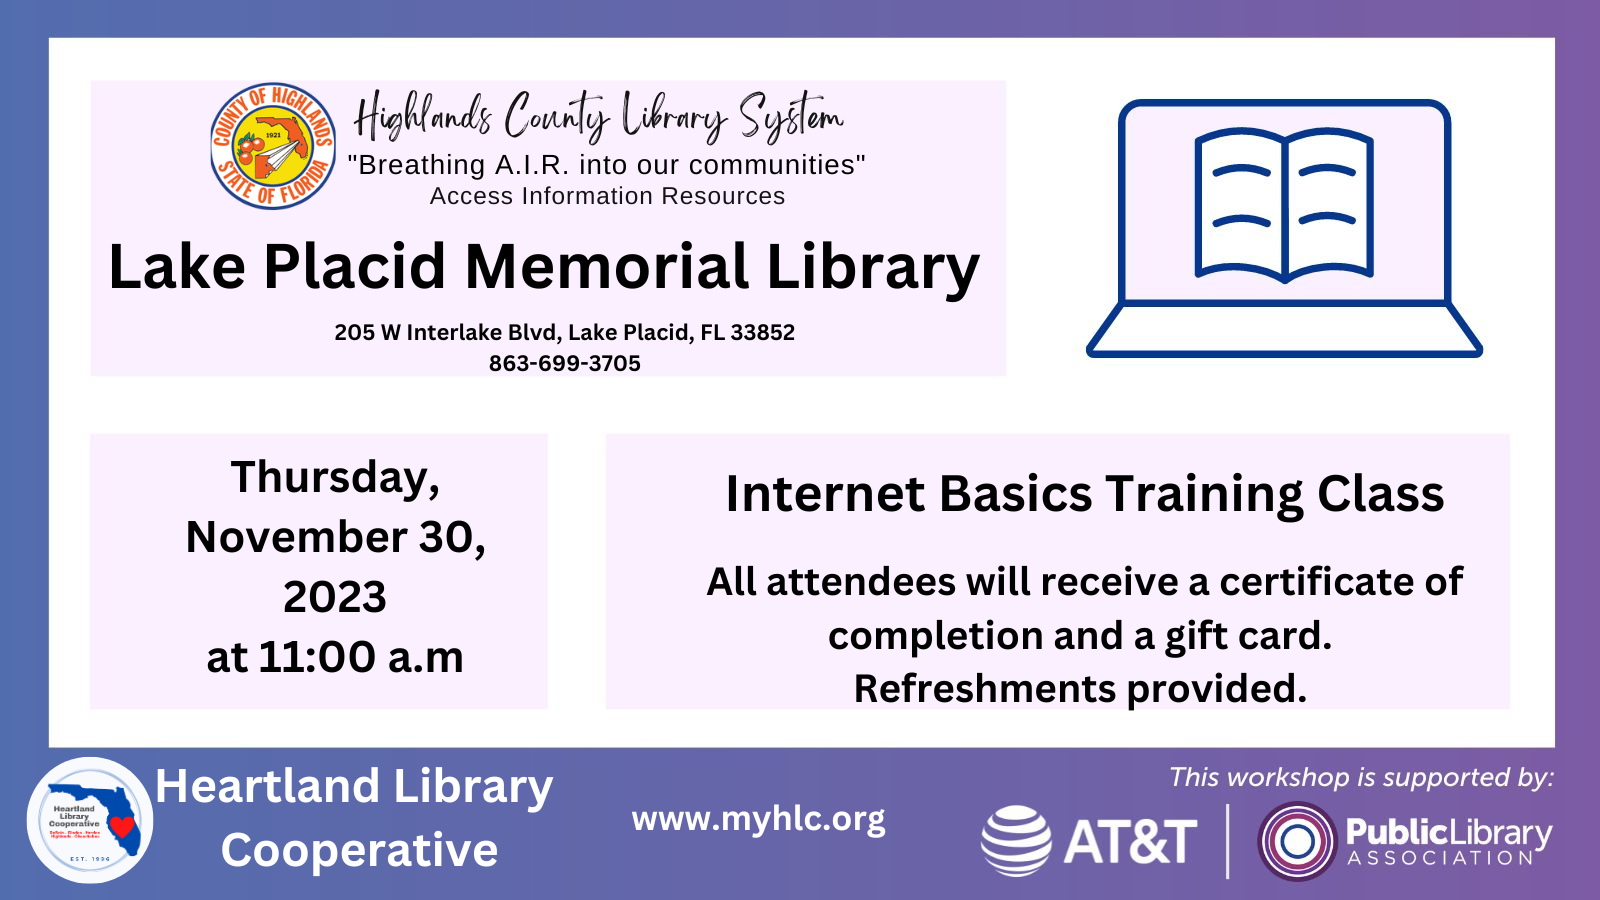 On Thursday, November 30, 2023 at 11 a.m., the Lake Placid Memorial Library will host an Internet Basics course.